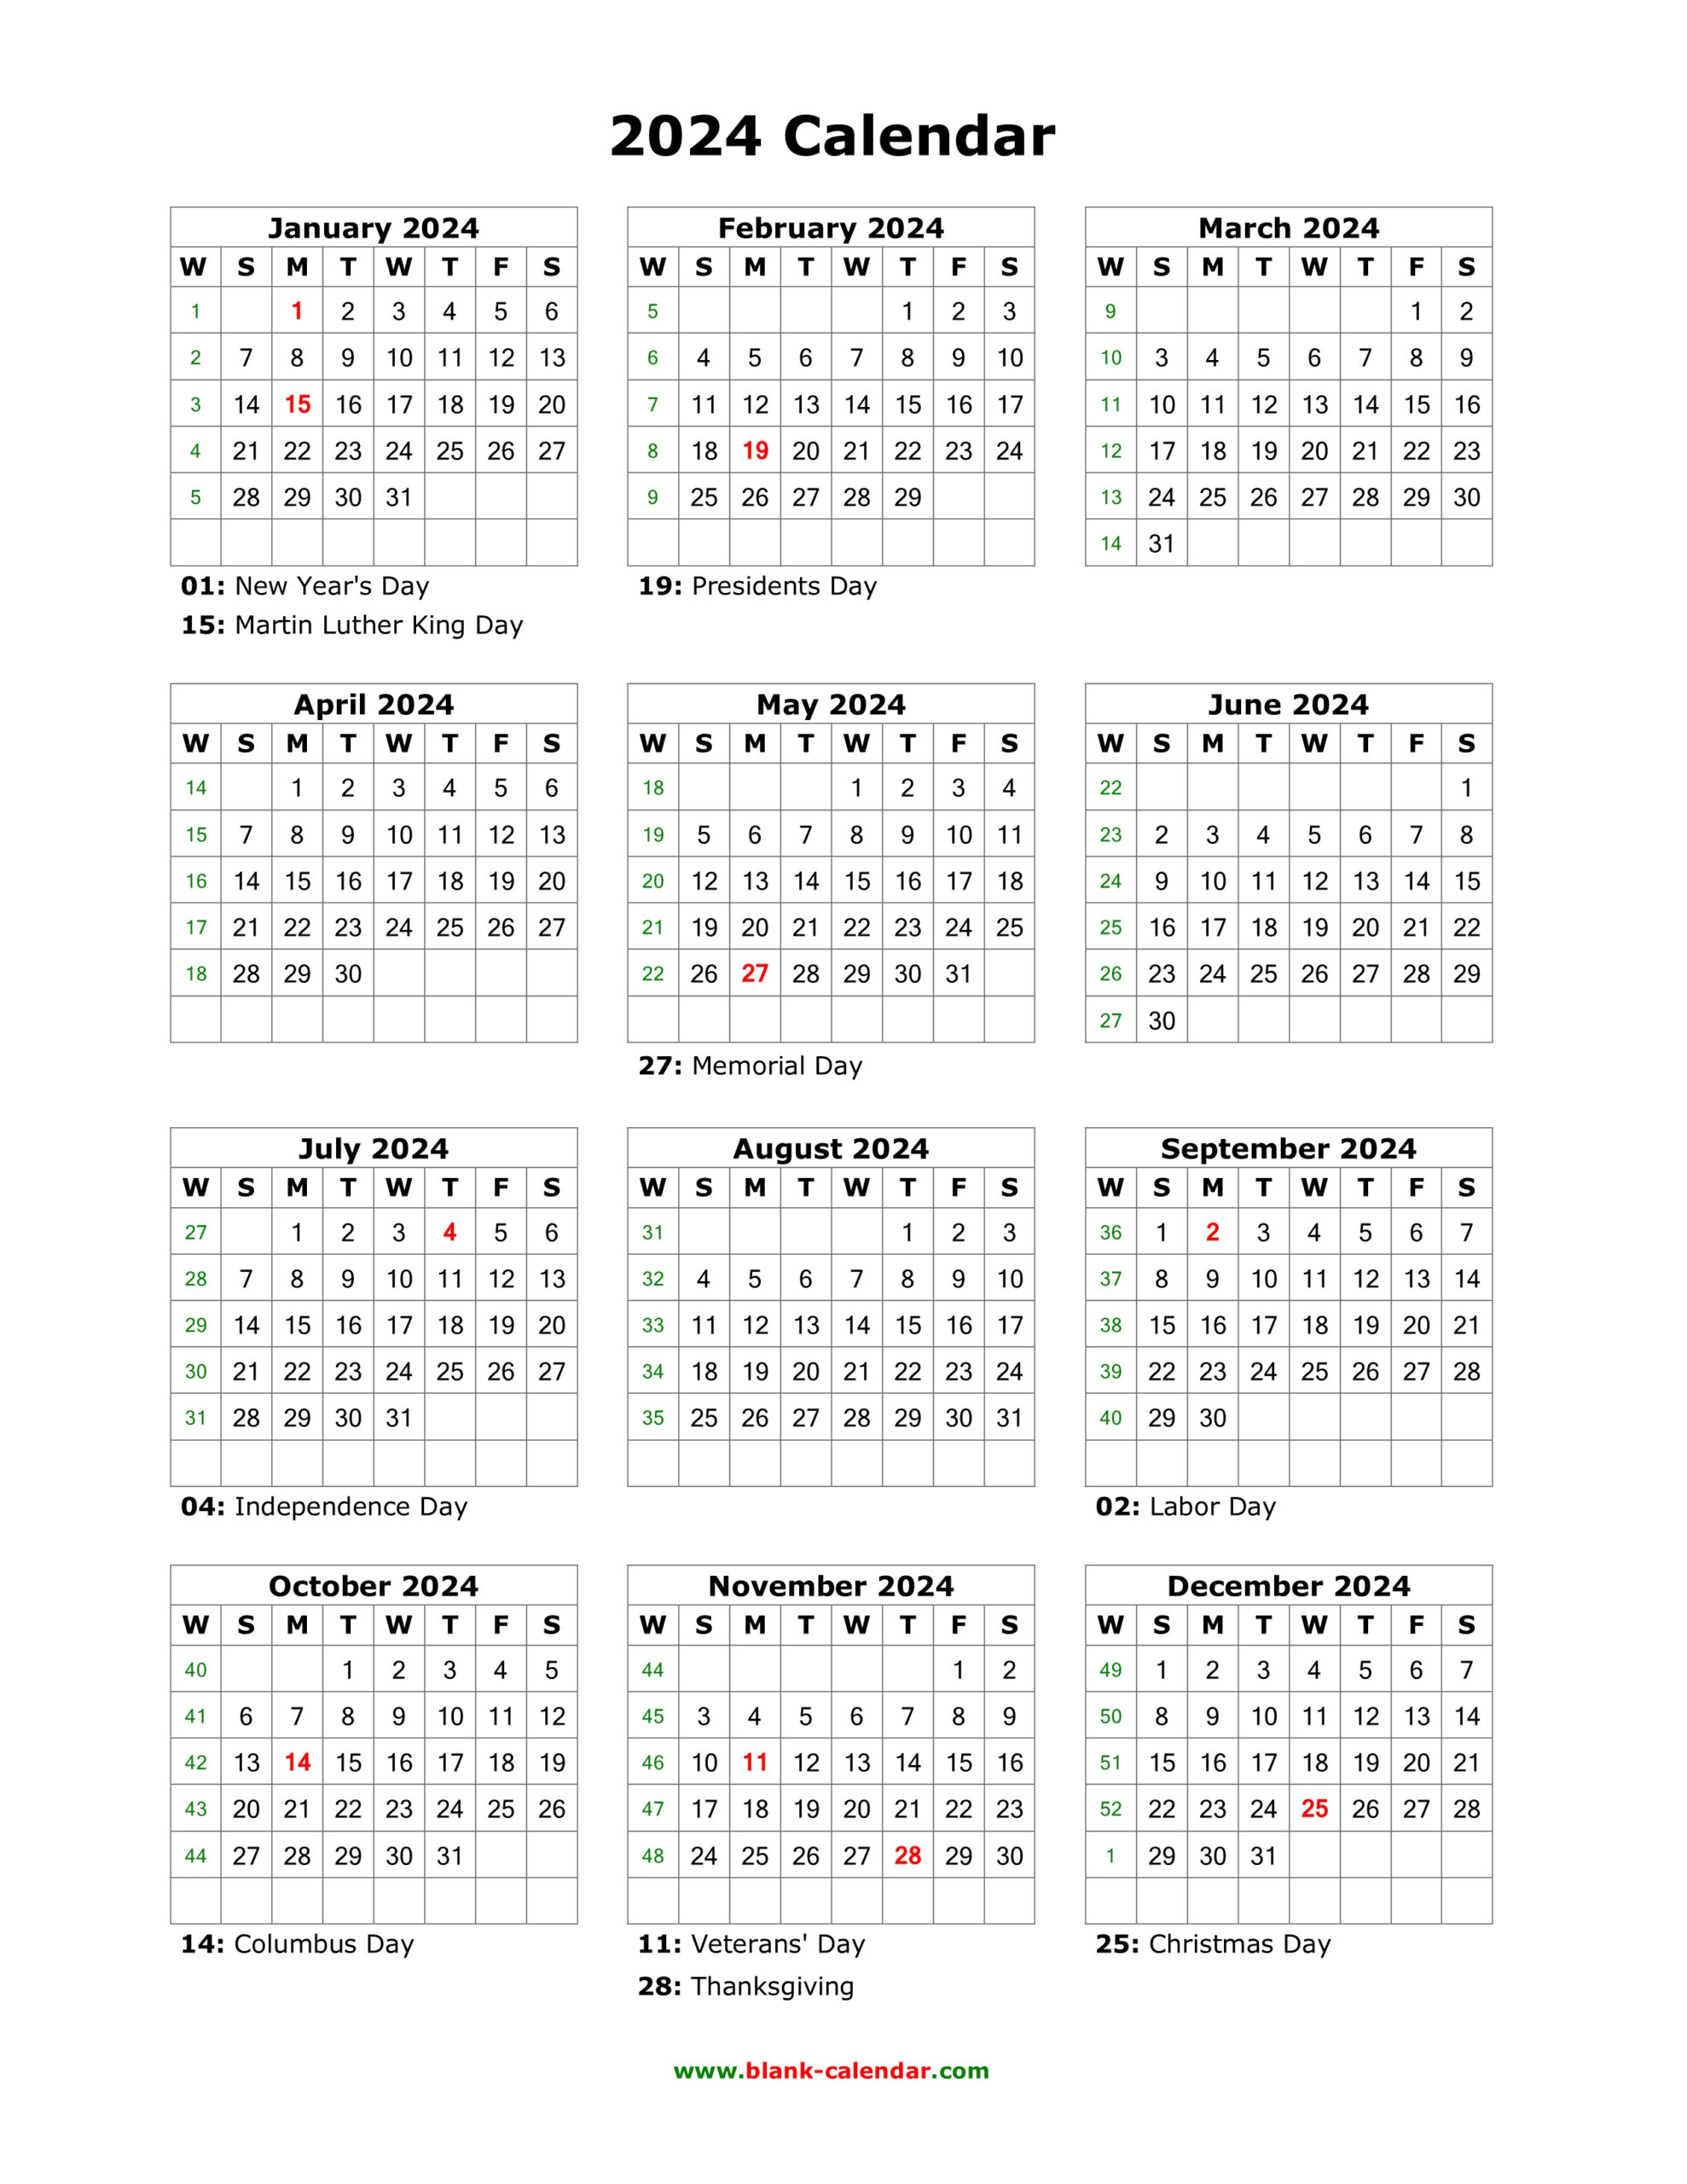 Download Blank Calendar 2024 With Us Holidays (12 Months On One for 2024 Calendar Printable 12 Months